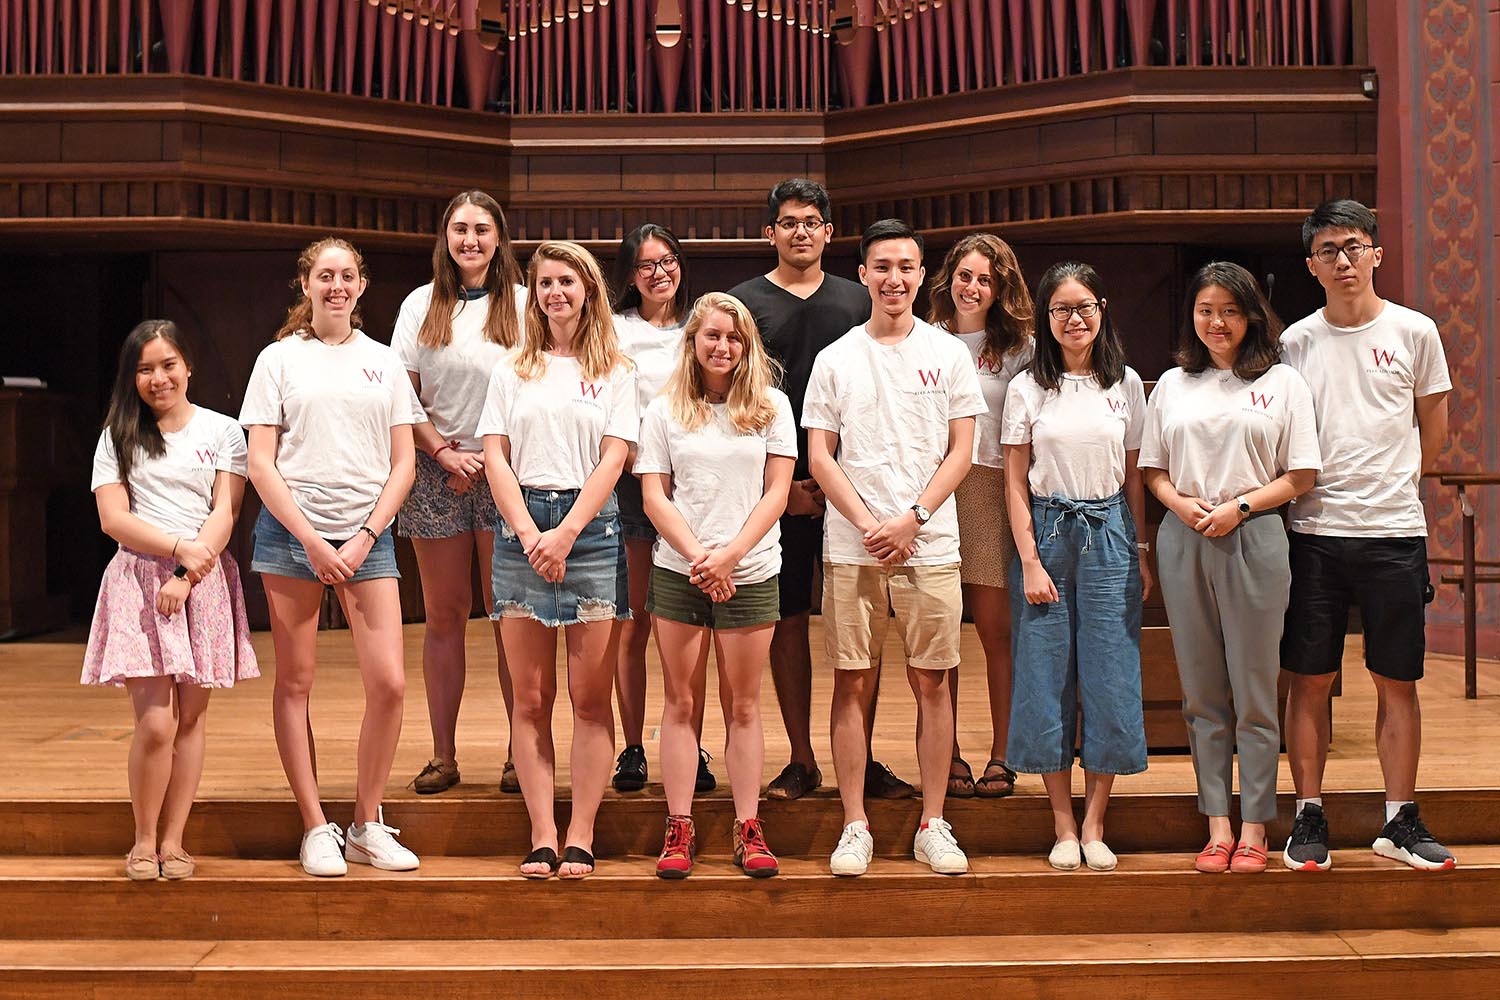 Academic peer advisors, pictured, work with Wesleyan students year-round. They attend week of training in May, a week in August, and an additional three hours of training per month.